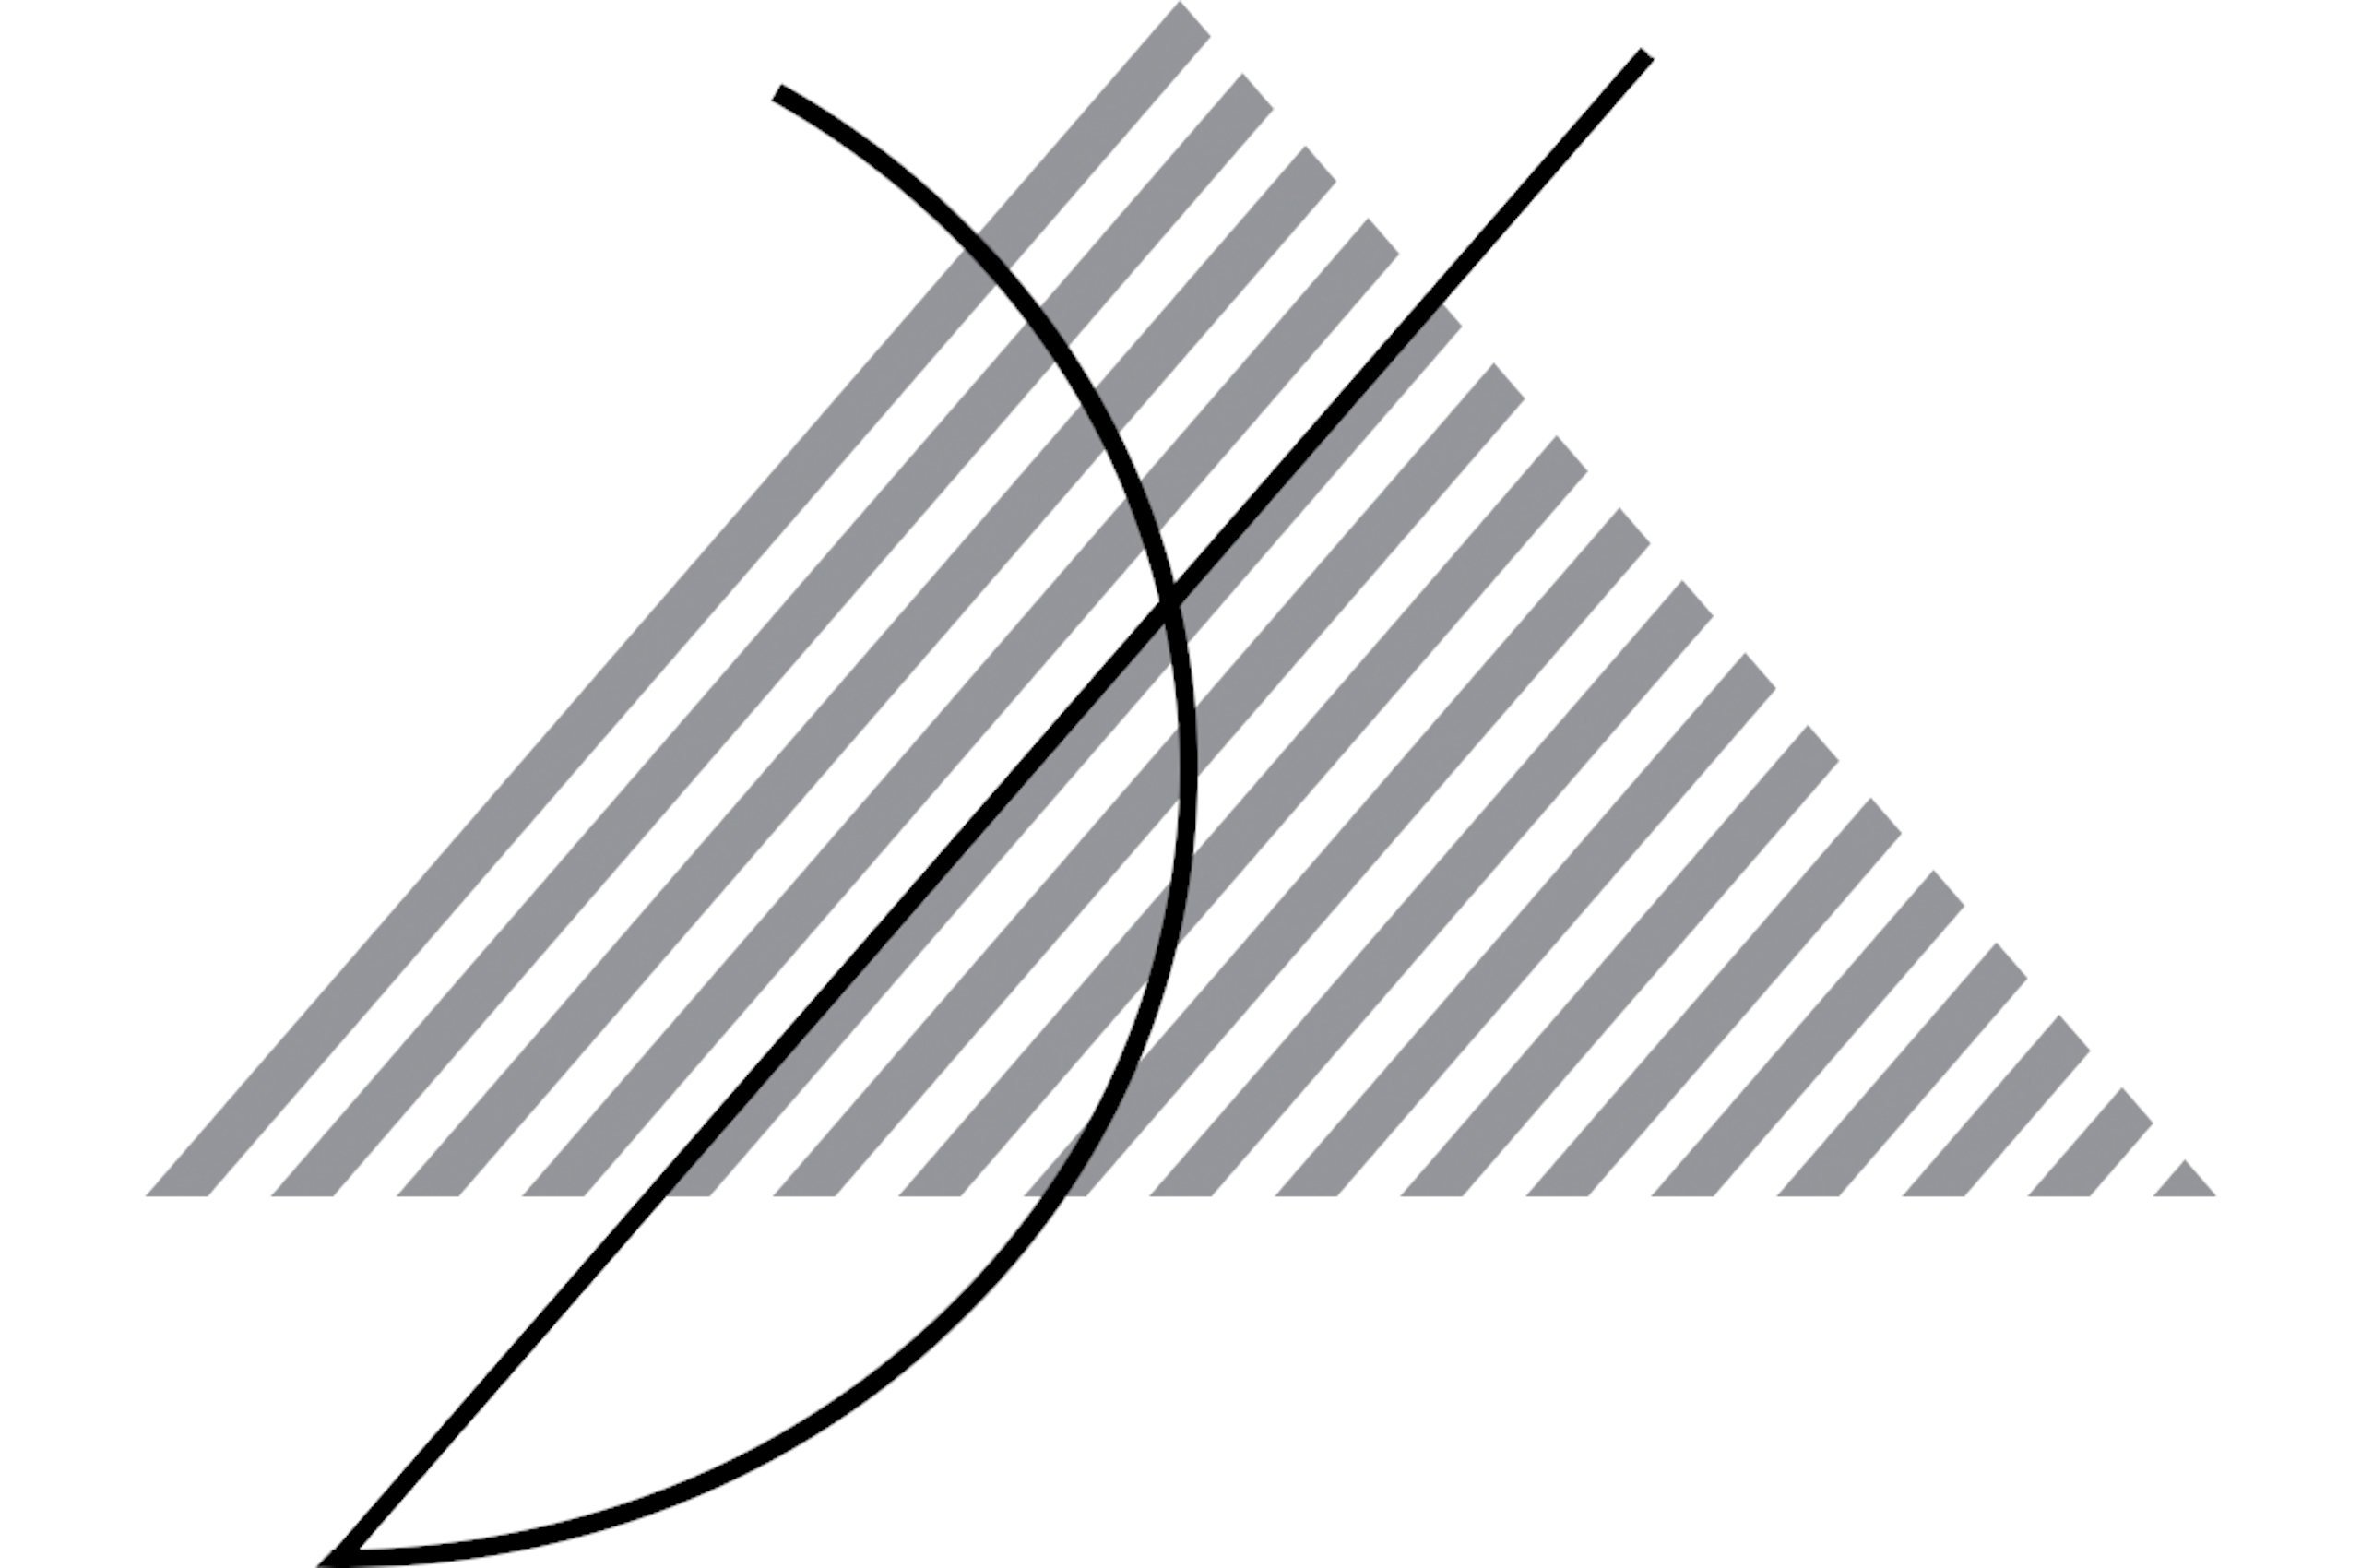 ARCSHS logo of grey striped triangle suggesting an A with curved and straight black line superimposed